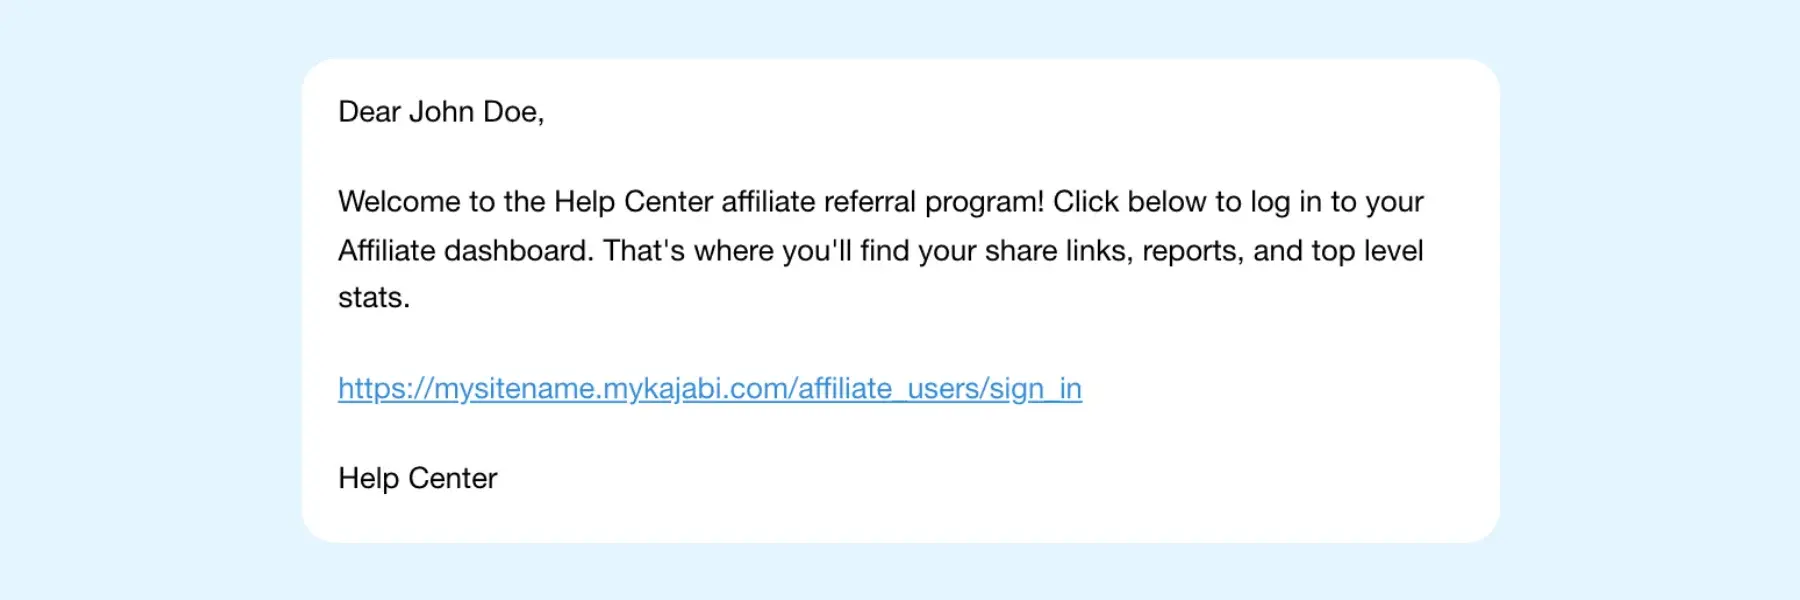 affiliate link, affiliate link in email, email marketing